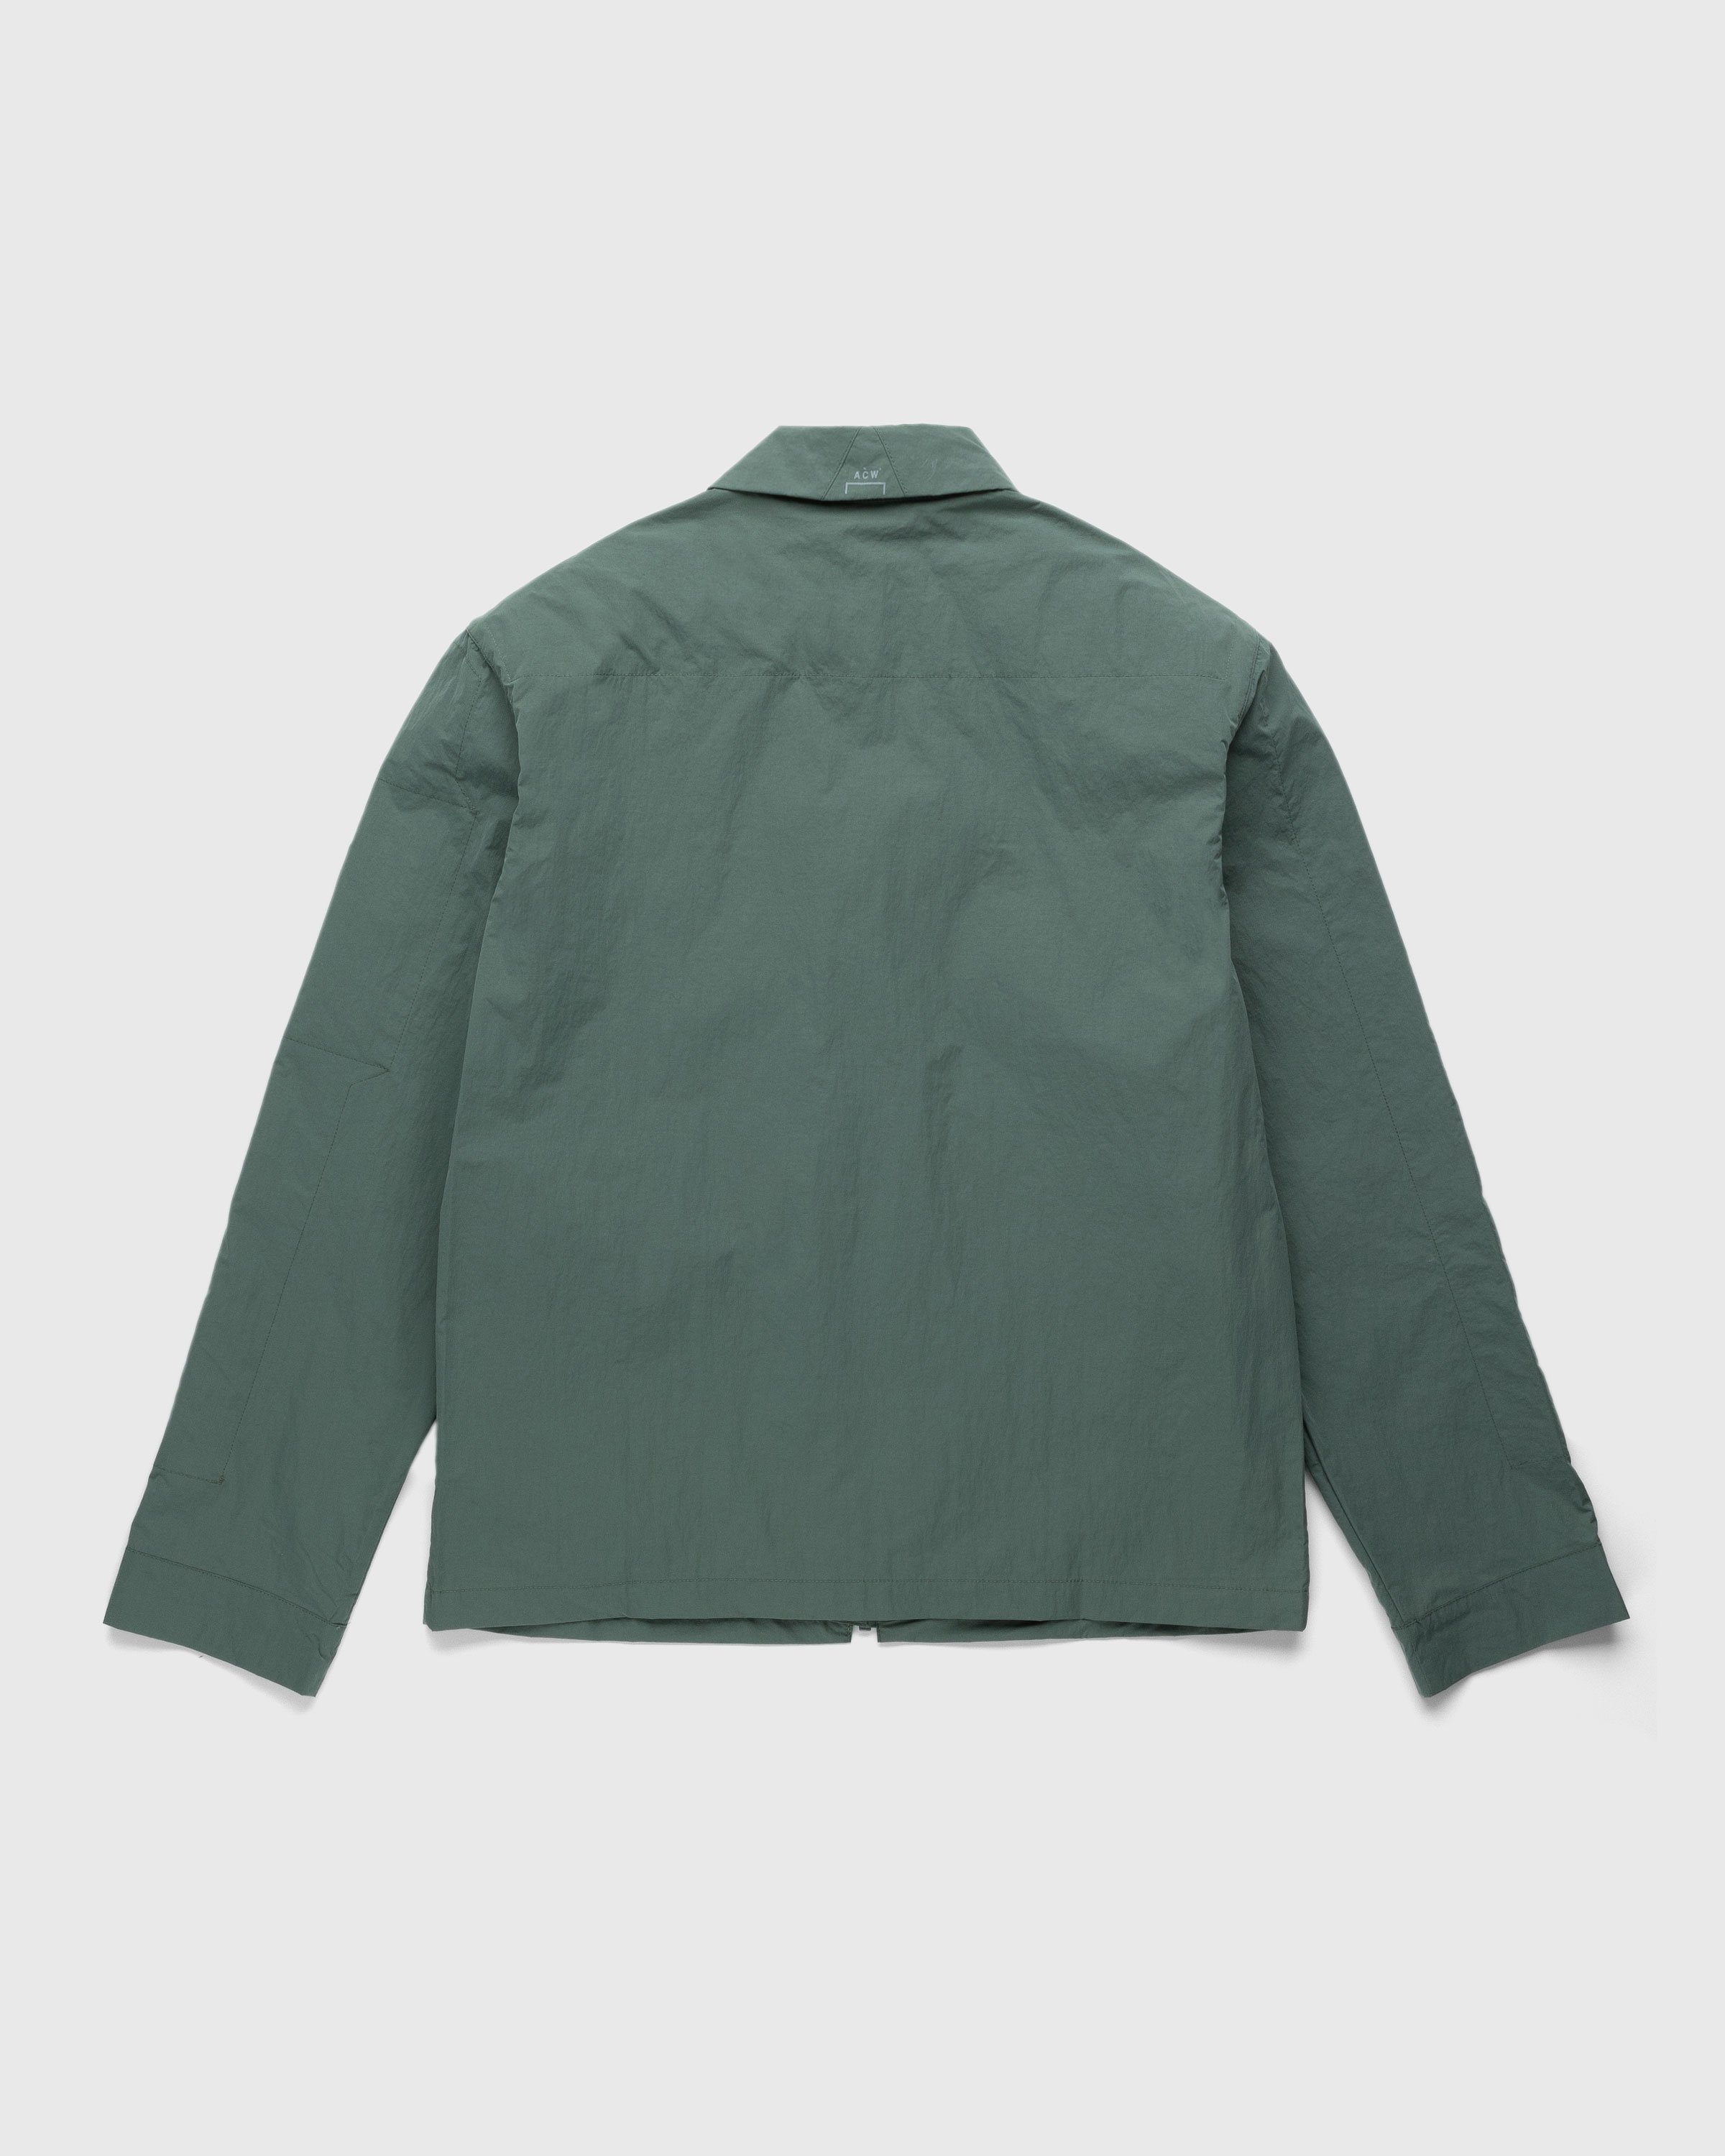 A-Cold-Wall* - Gaussian Overshirt Military Green - Clothing - Green - Image 2